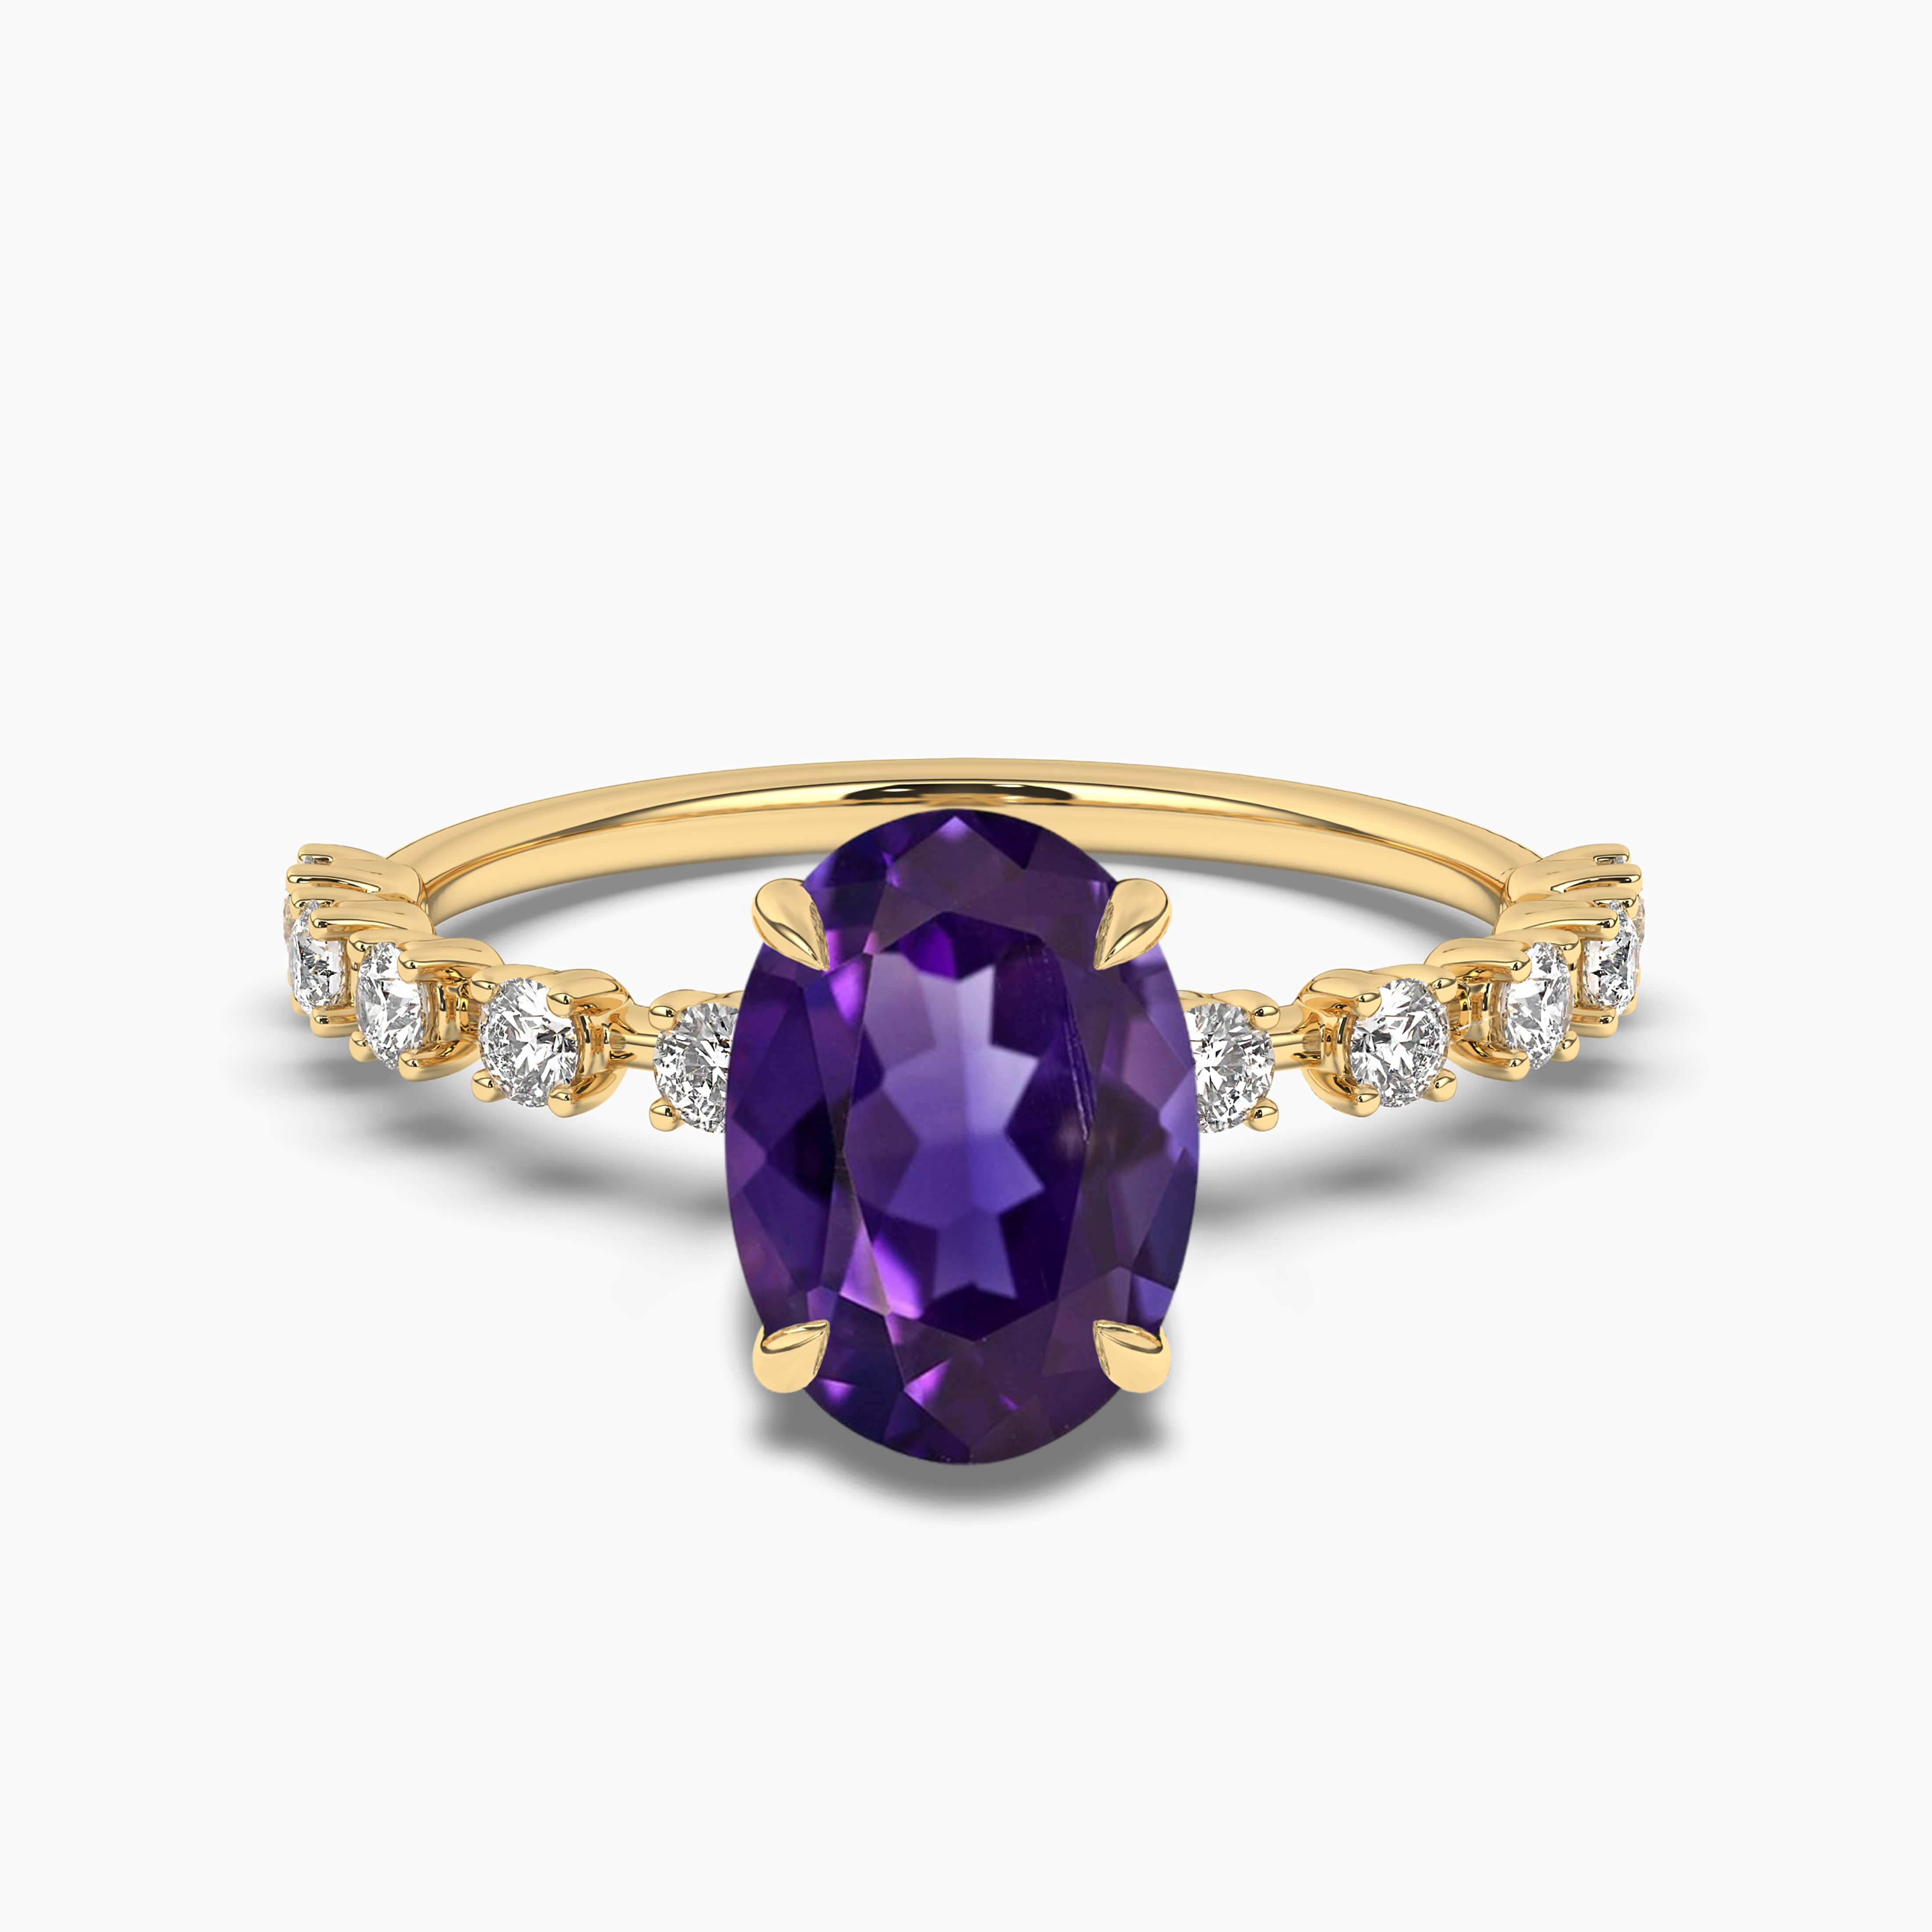 Oval Shaped Amethyst Engagement Ring with Diamond